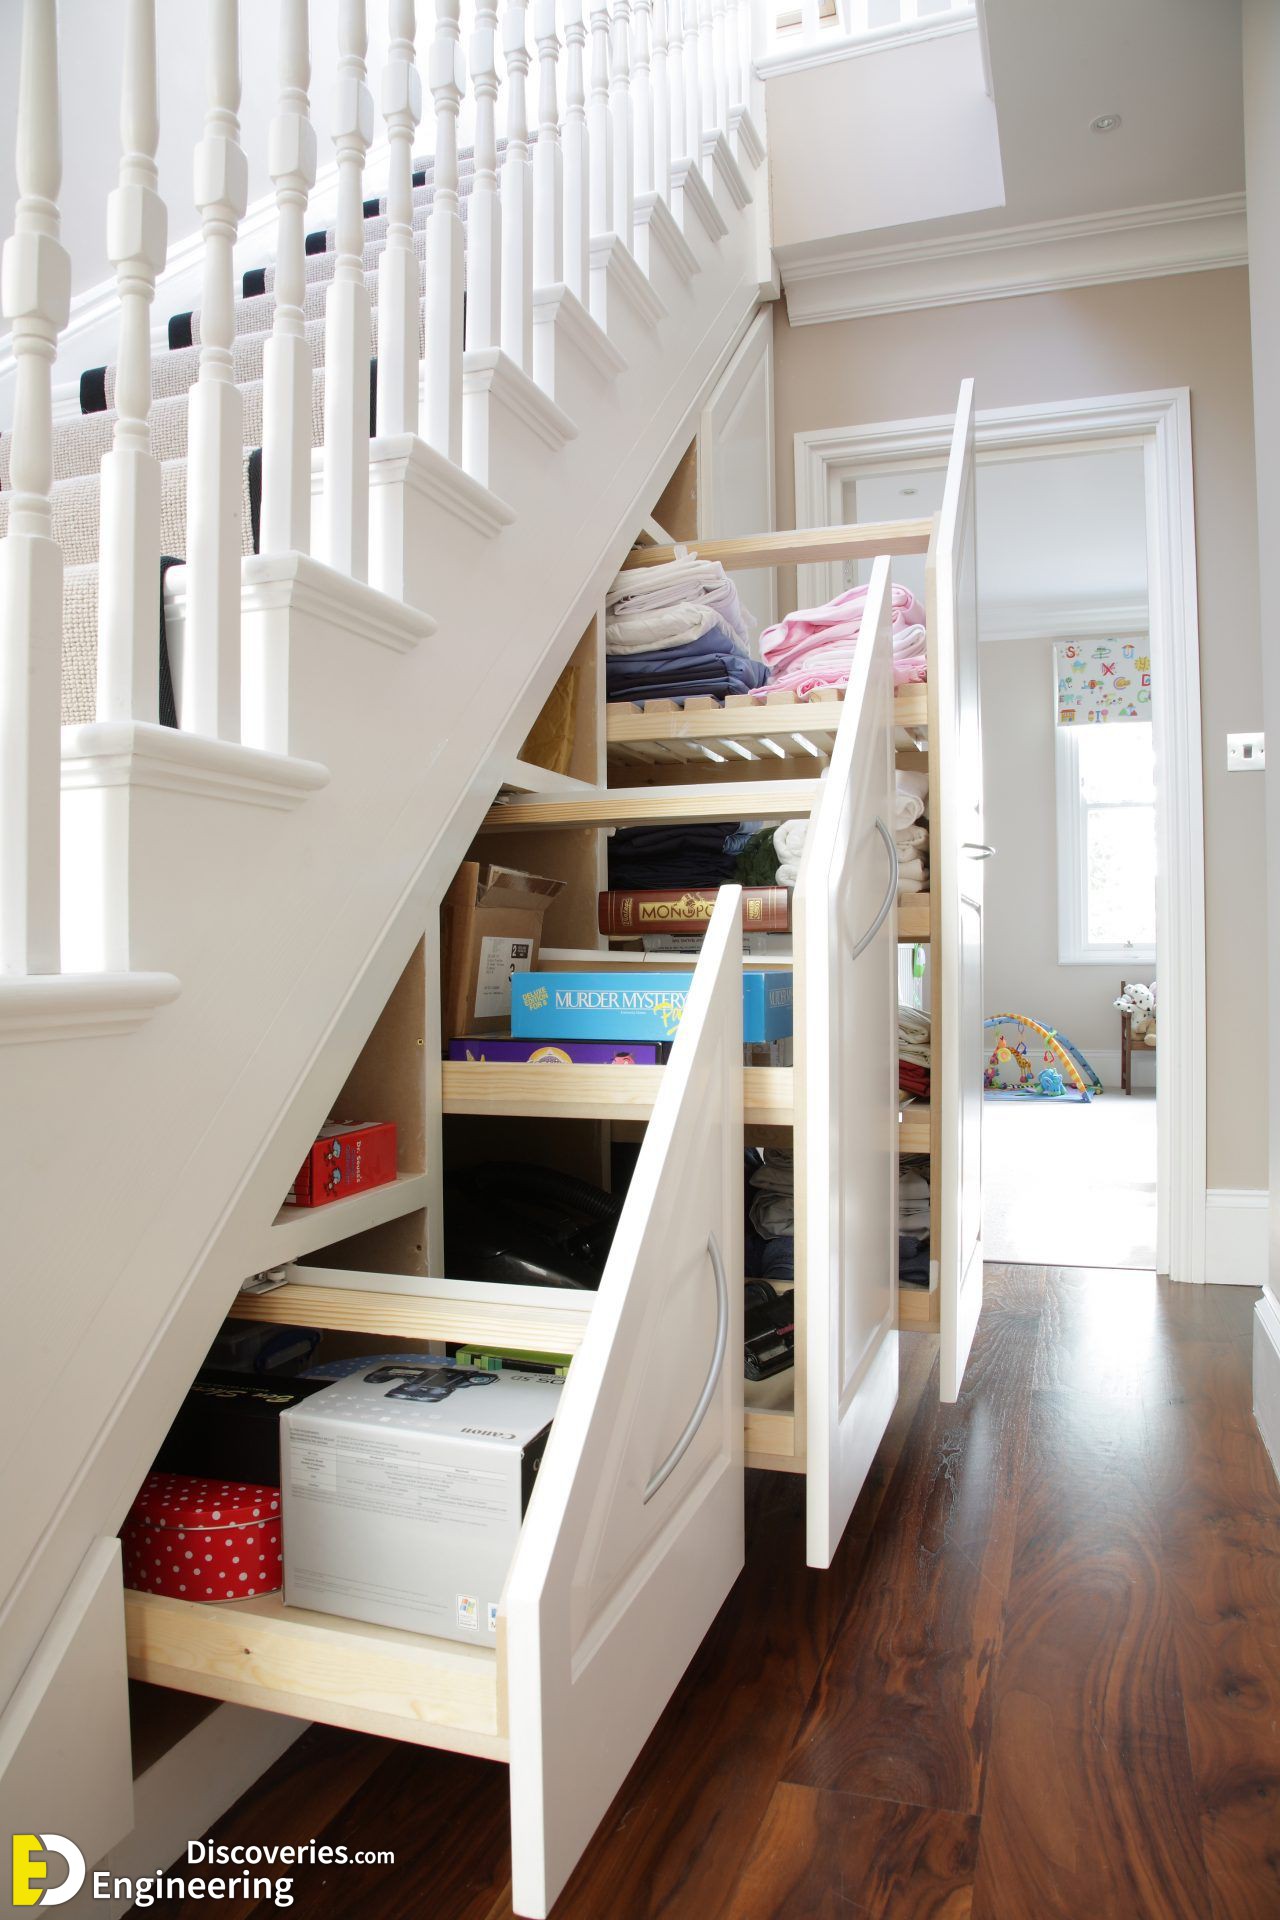 https://engineeringdiscoveries.com/5-engineering-discoveries-maximize-your-space-with-style-36-genius-under-stair-storage-hacks/